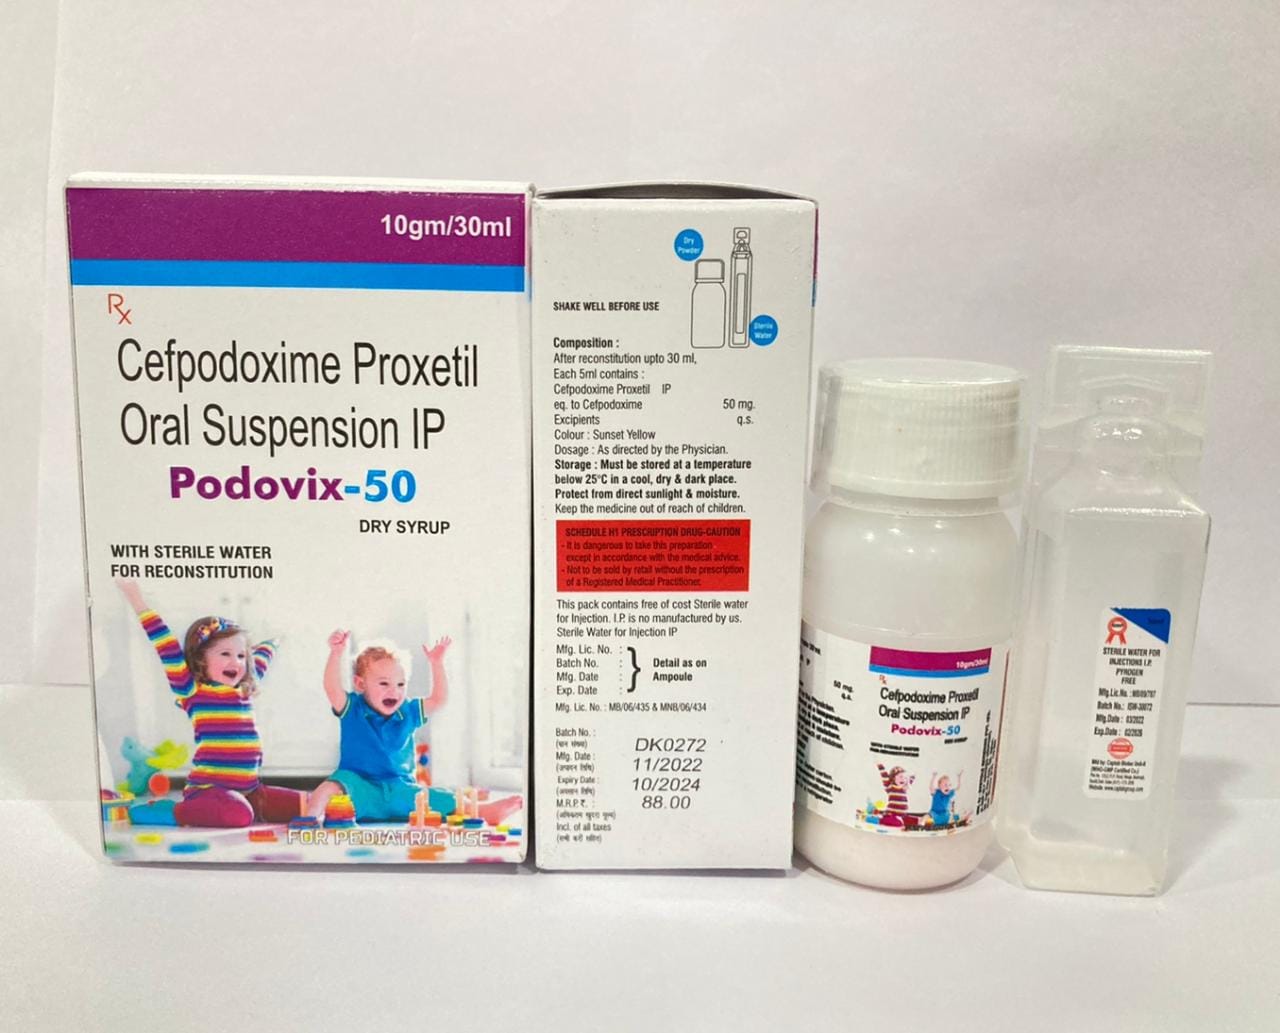 Product Name: PODOVIX 50 Dry Syrup, Compositions of PODOVIX 50 Dry Syrup are CEFPODOXIME 50MG - Feravix Lifesciences